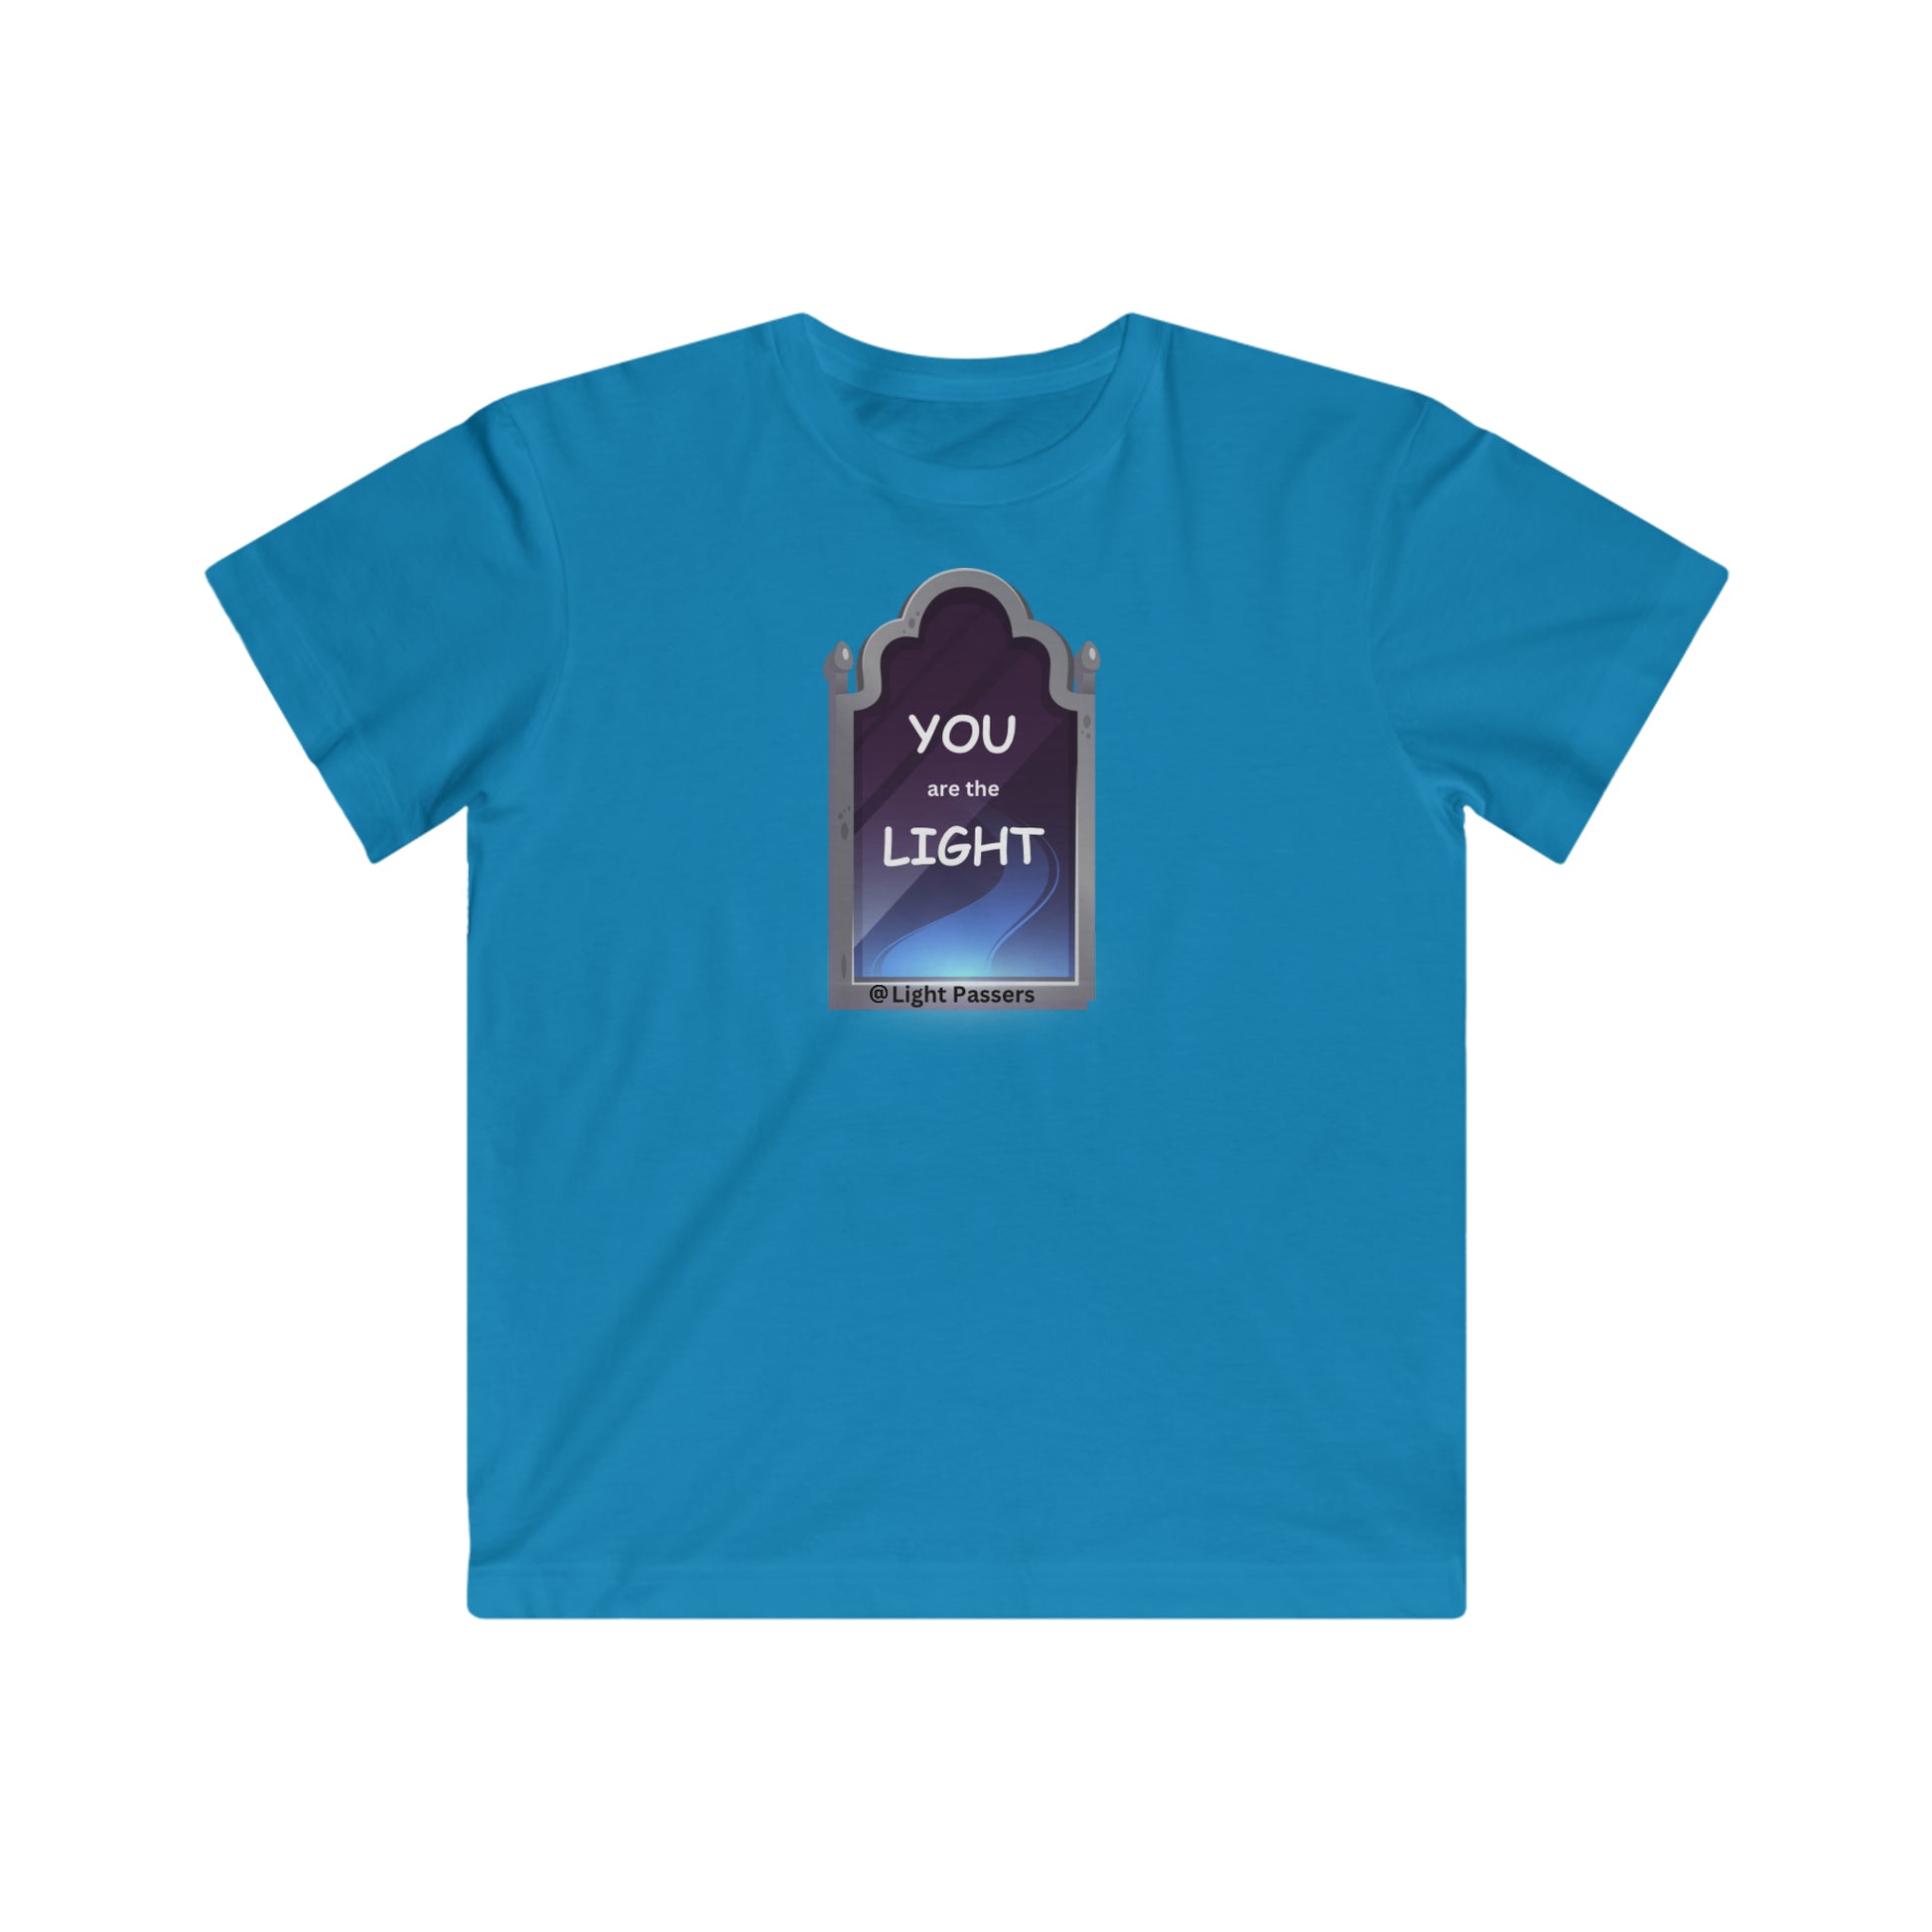 Youth T-shirt featuring a picture of a light on a blue shirt. Soft jersey fabric, 100% combed ringspun cotton, light 4.5 oz/yd² fabric, tear away label, regular fit.